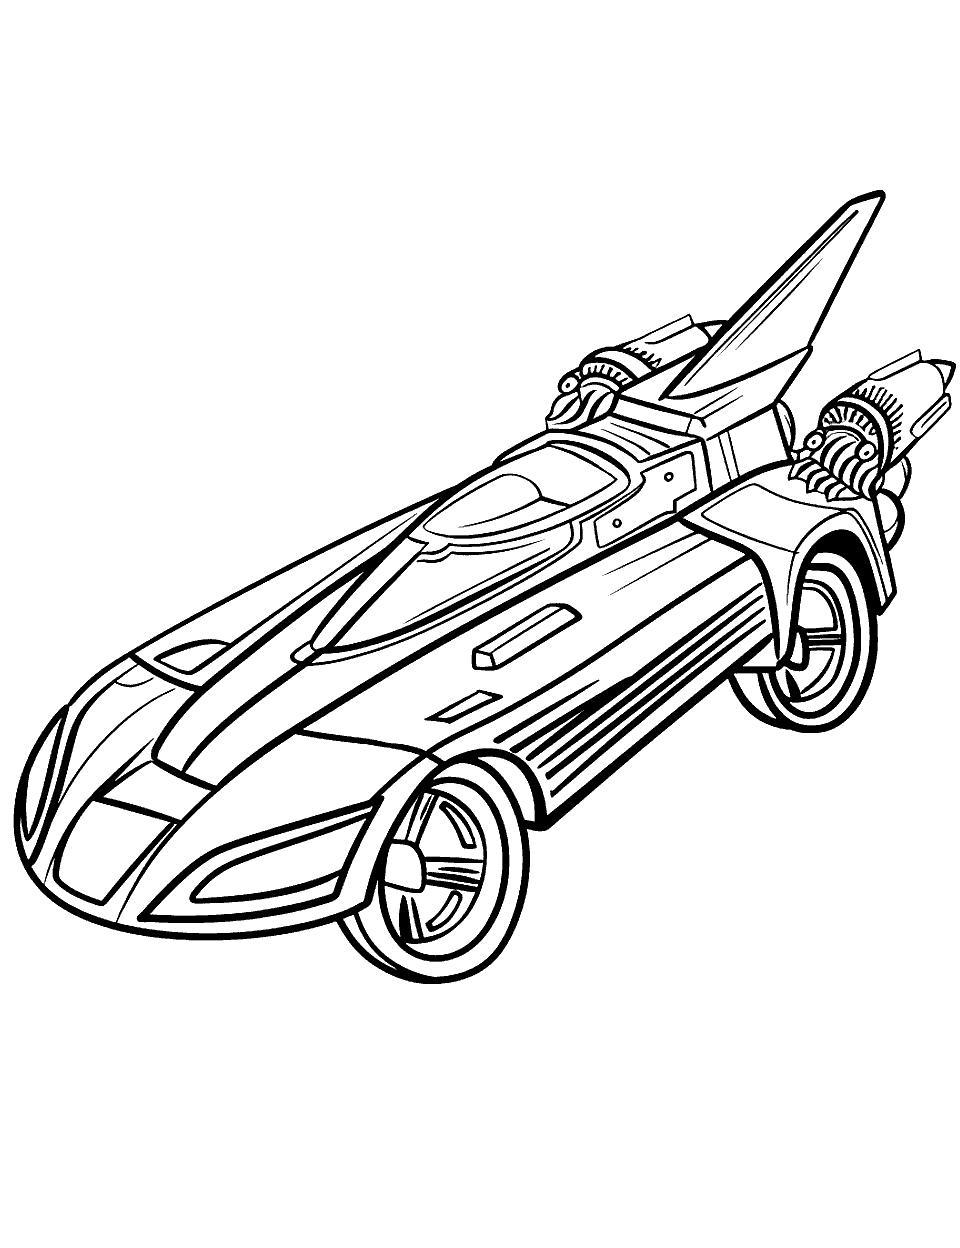 Space Shuttle Transport Coloring Page - A Hot Wheels car designed like a space shuttle.